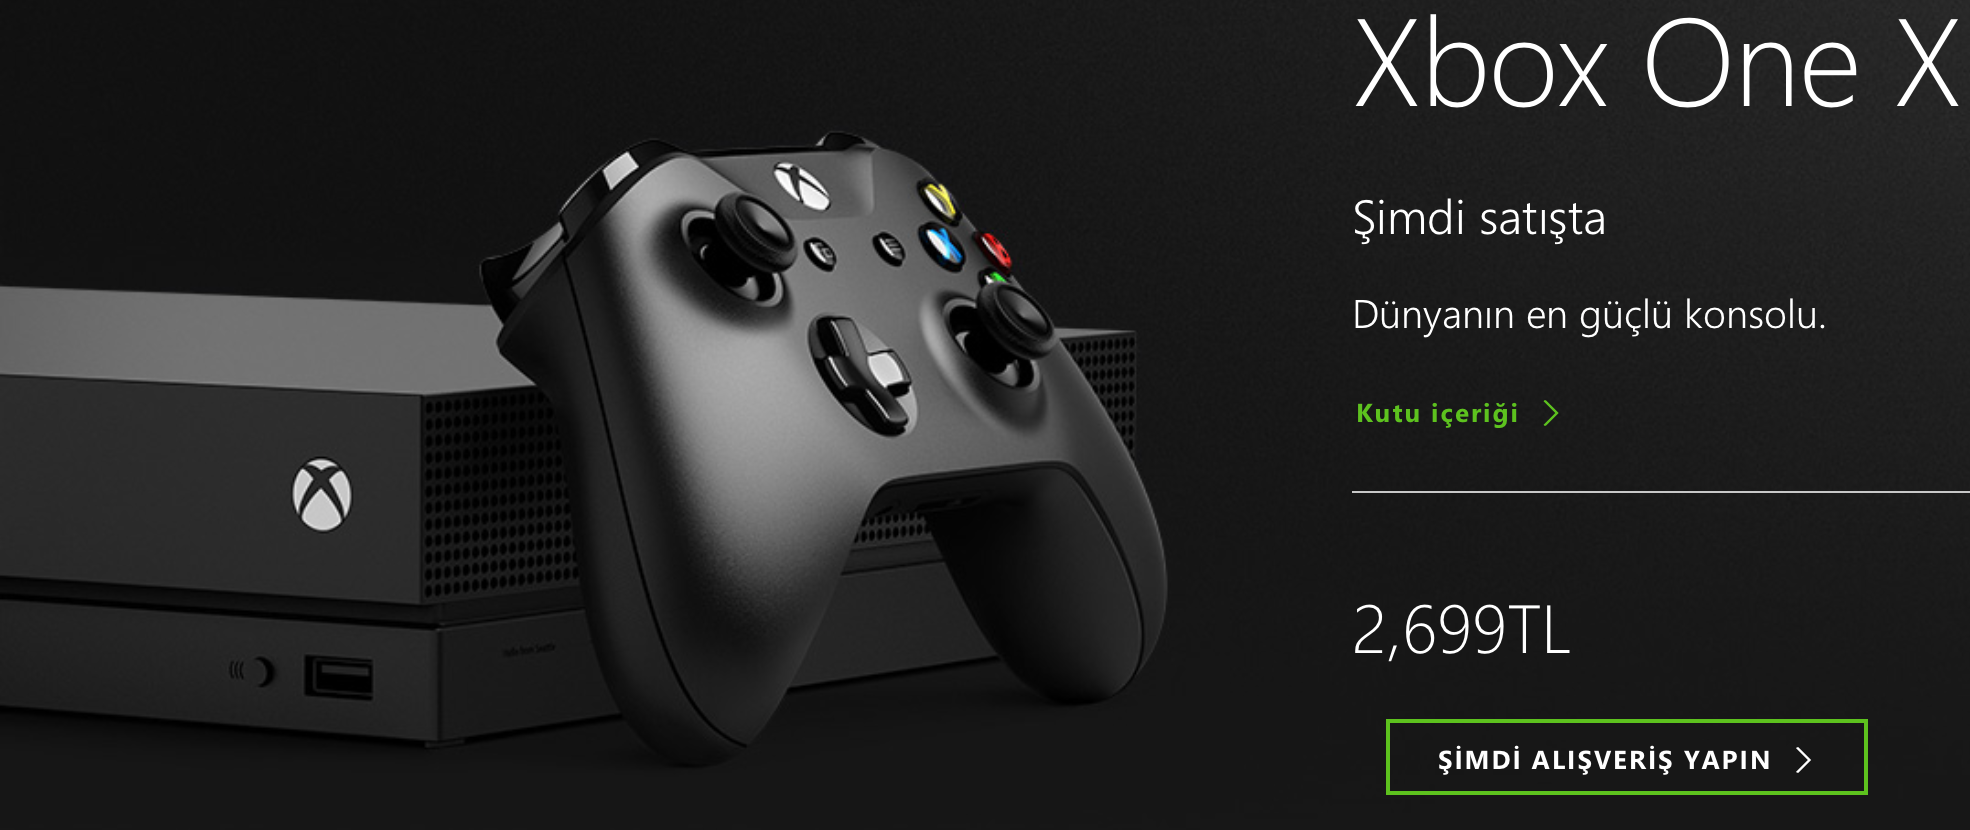 1510032297_xbox-one-x.png